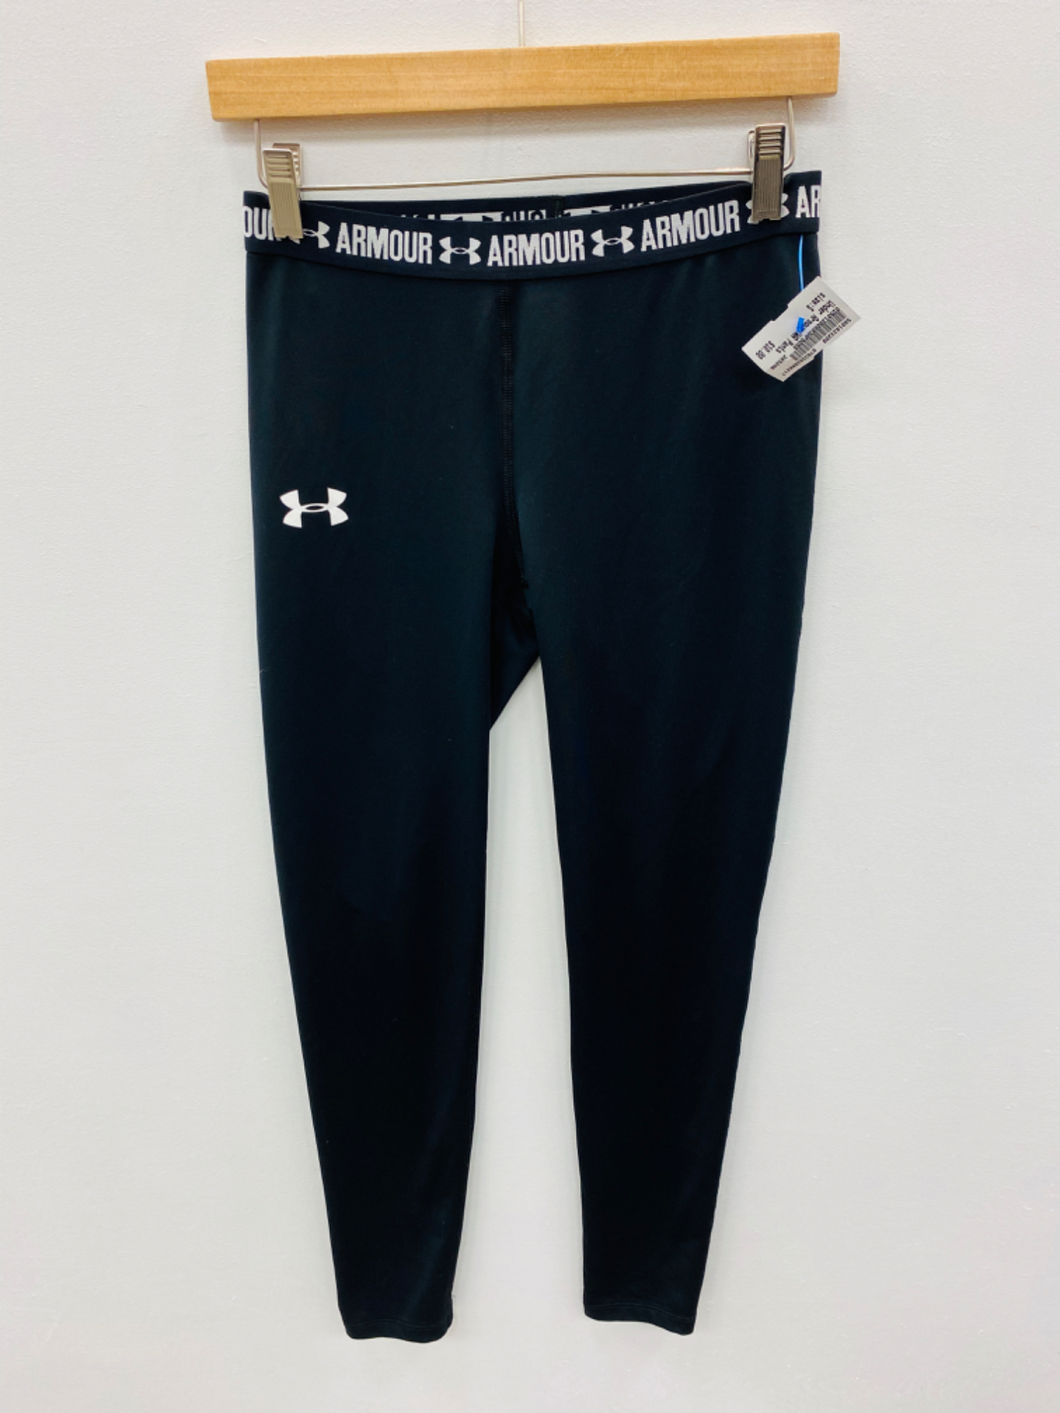 Under Armour Athletic Pants Size Small